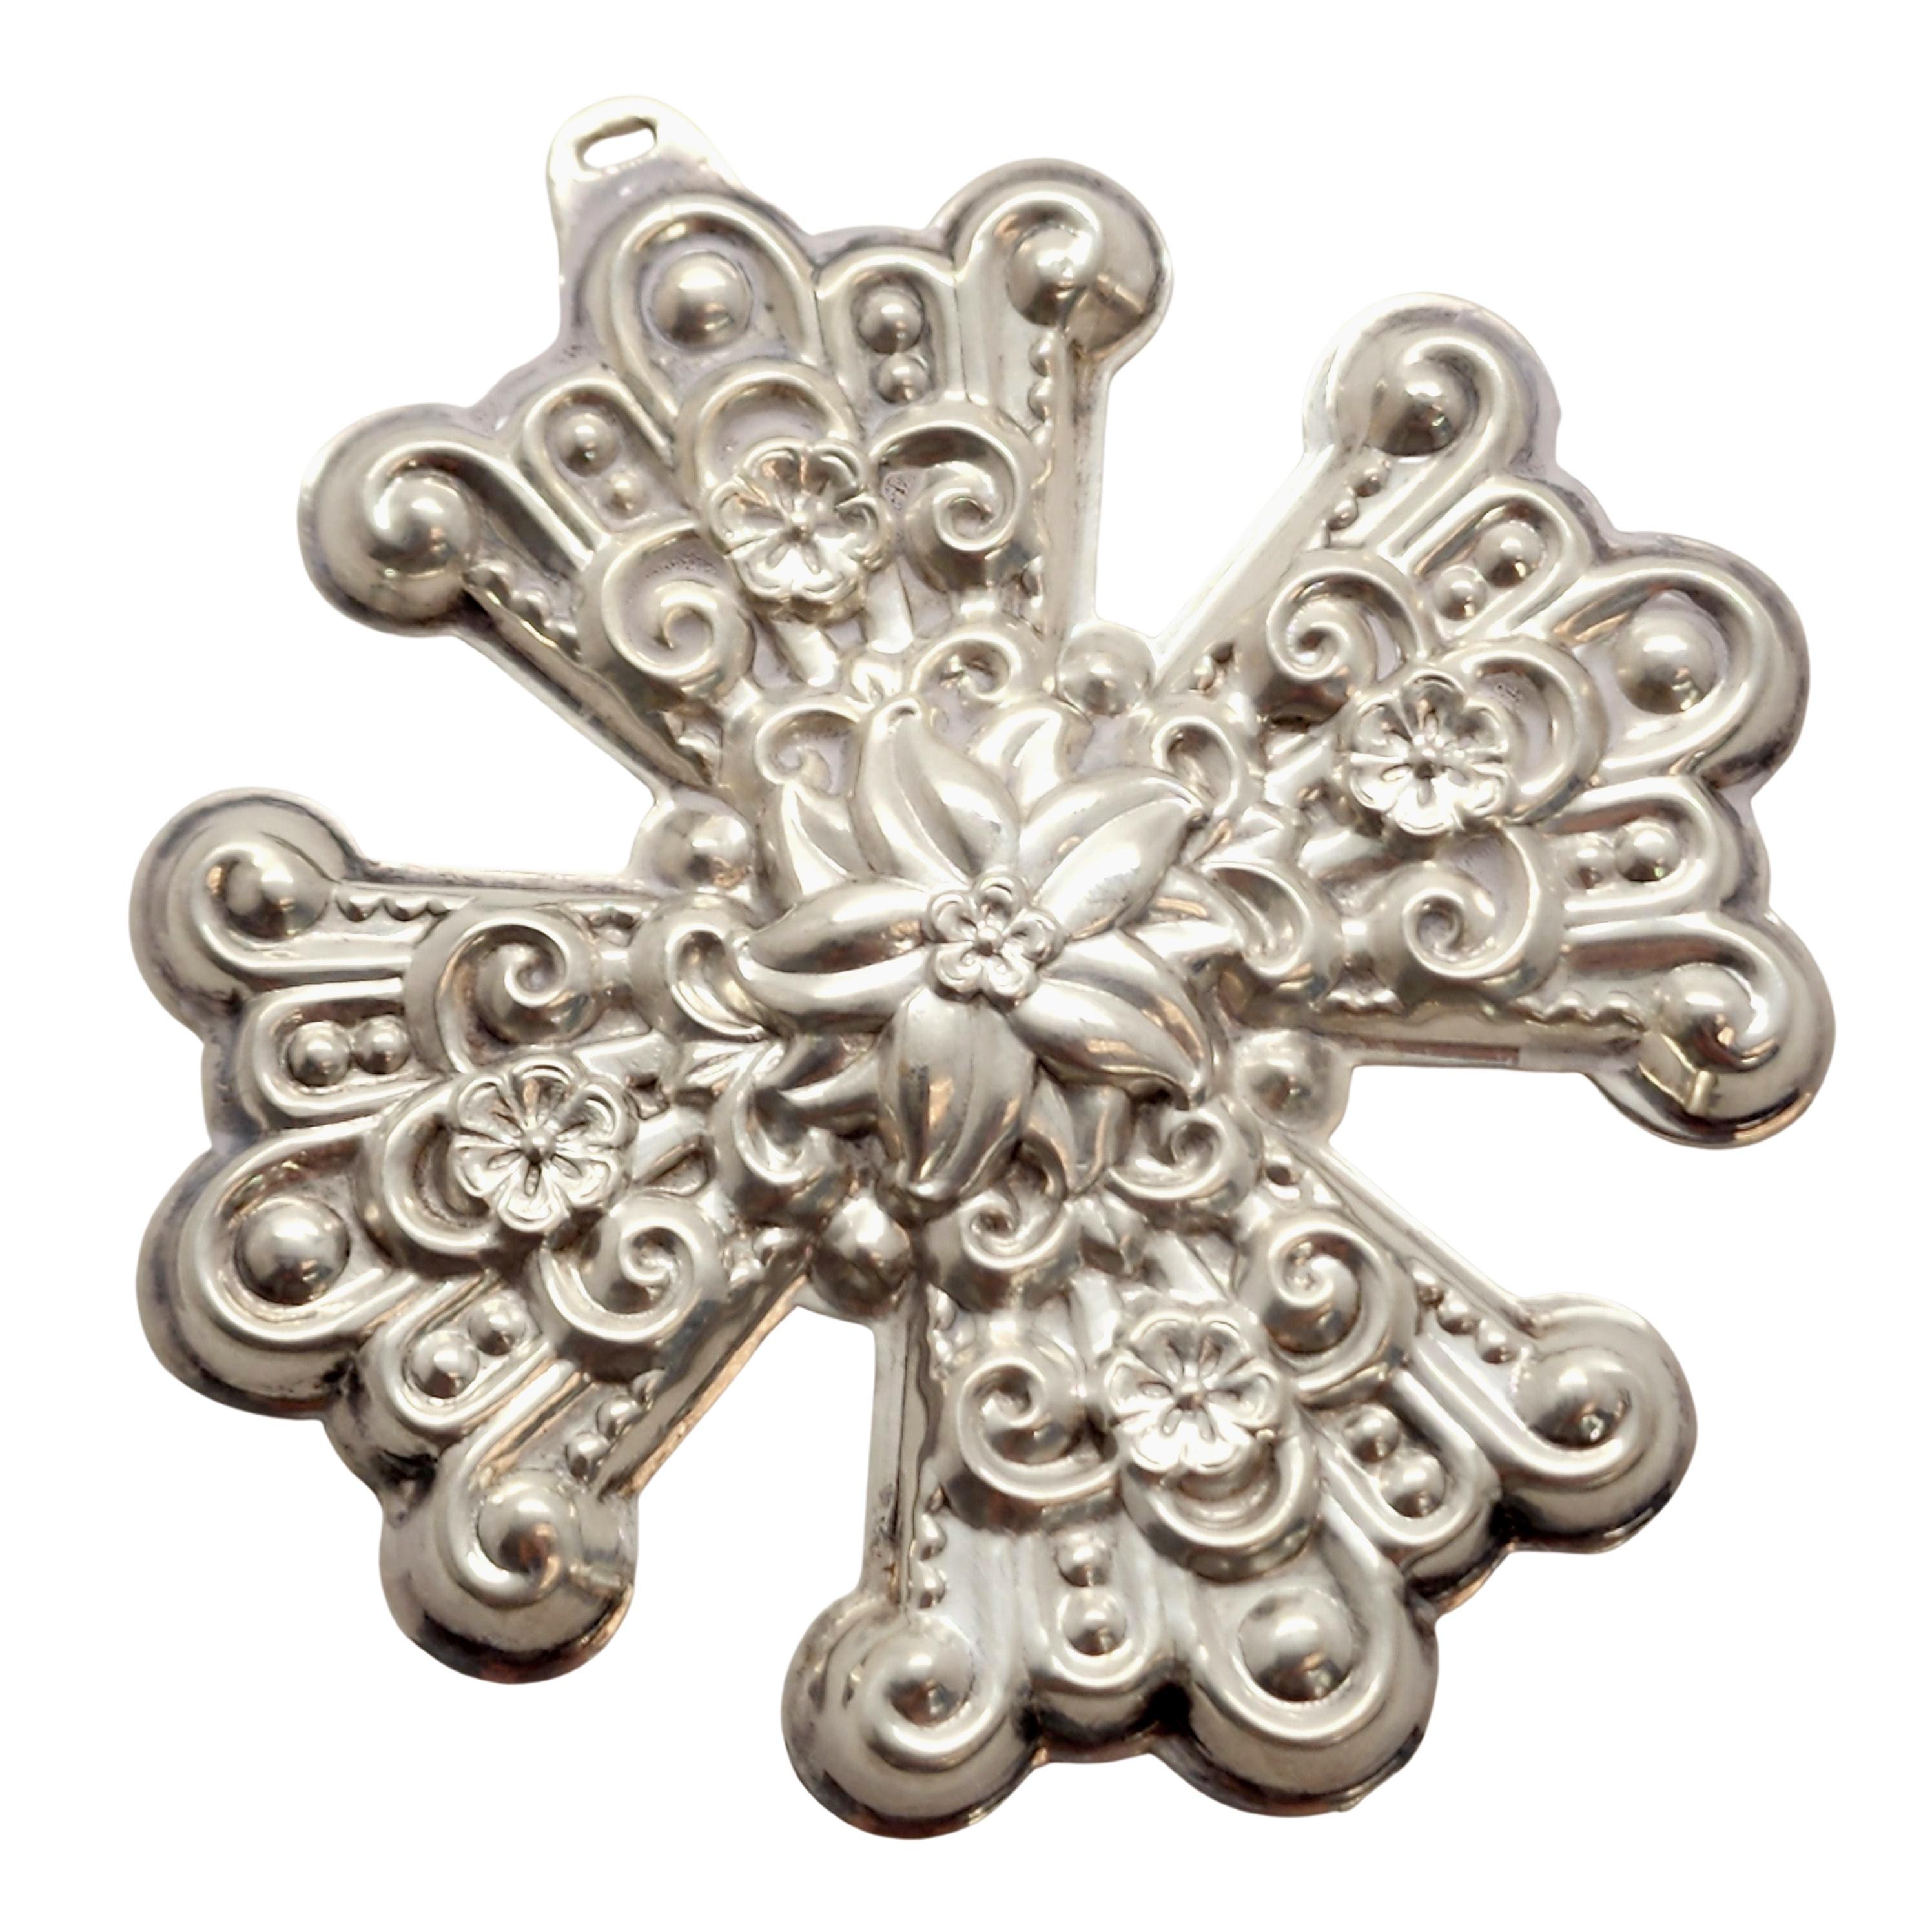 Women's Reed & Barton Sterling Silver 1974 Christmas Cross Ornament (A) #12858 For Sale